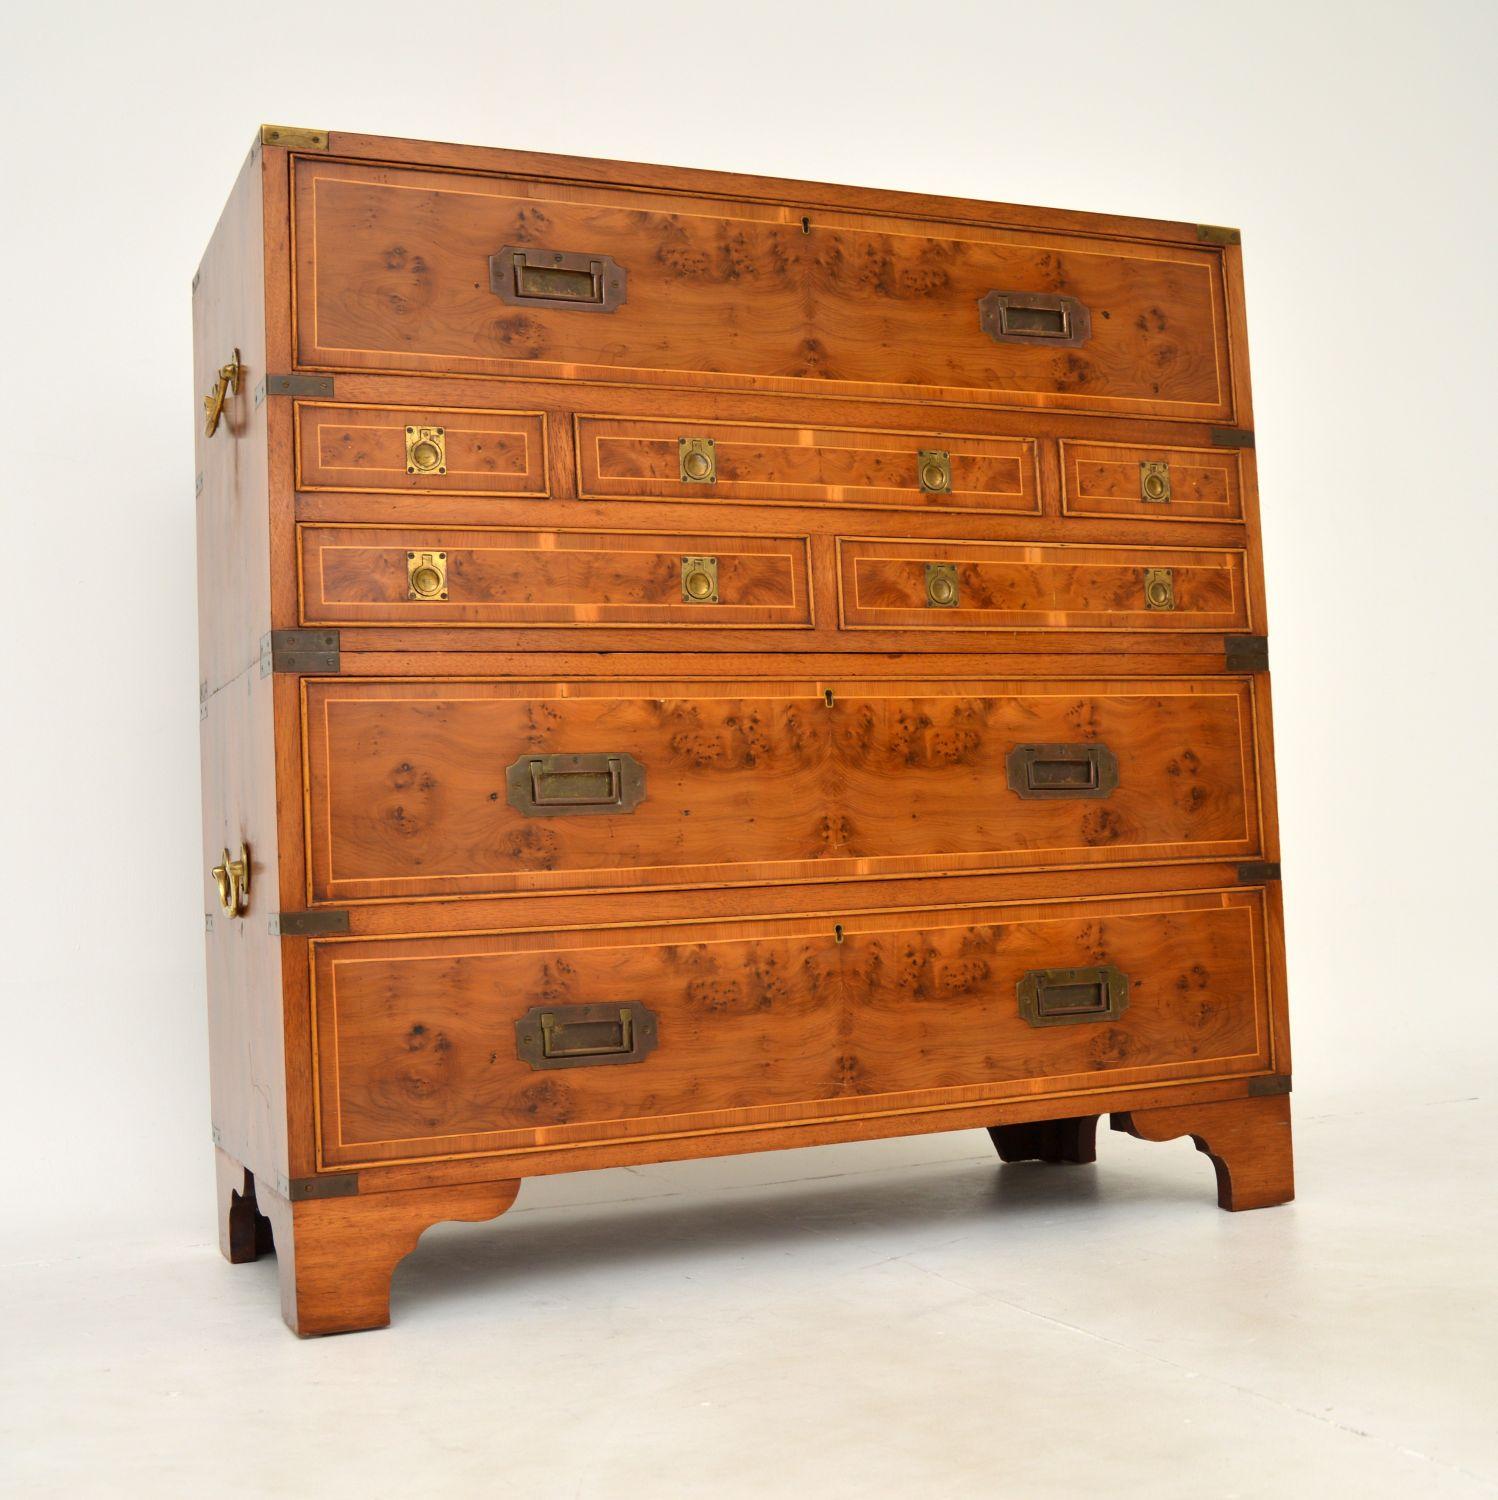 A superb antique military campaign style chest of drawers with a built in secretaire bureau. This was made in England, it dates from around the 1930’s.

The quality is absolutely amazing, this is a very smart and very useful item. The top drawer